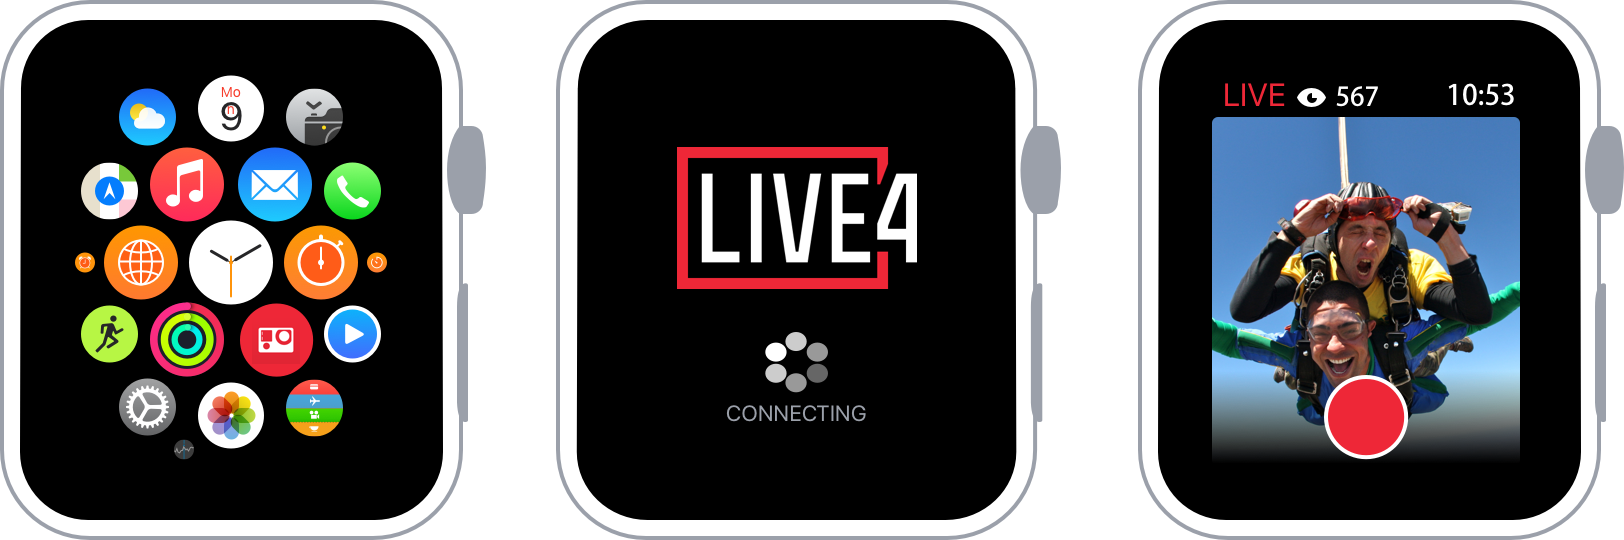 Smartwatches support in LIVE4 app